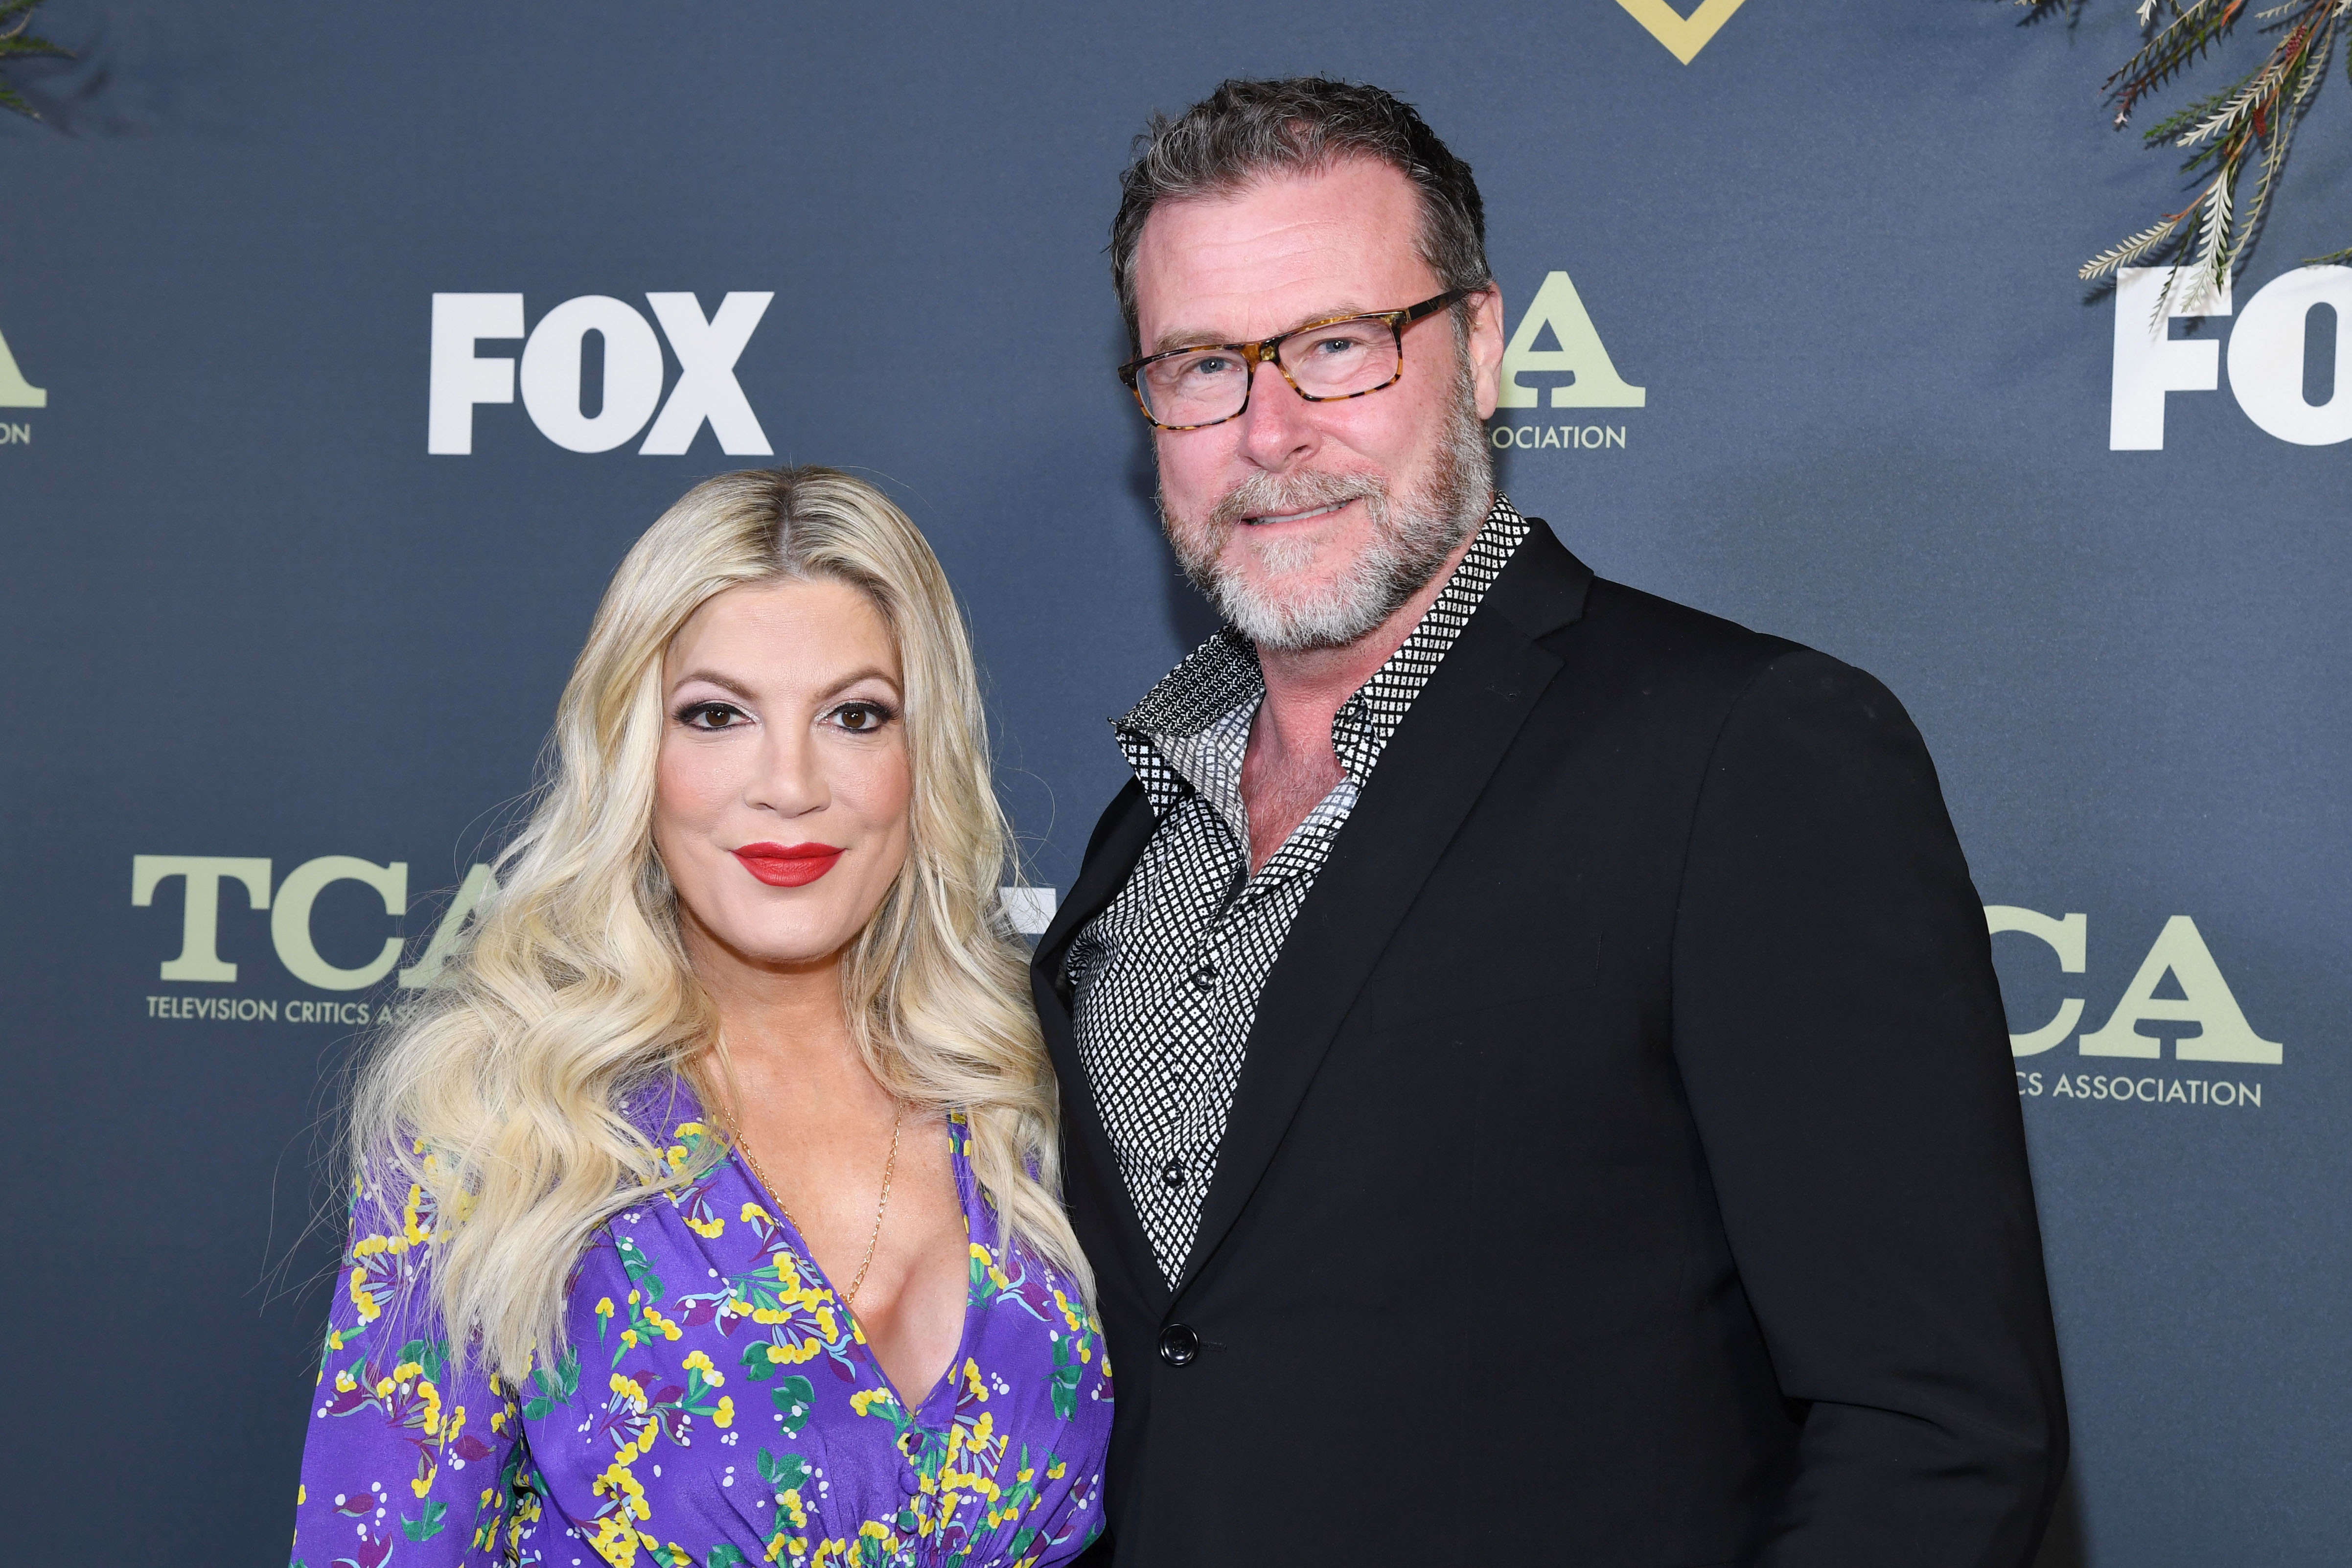 Tori Spelling and Dean McDermott appear together at the Fox Winter TCA. Tori Spelling's reality TV show does not seem to include McDermott. 